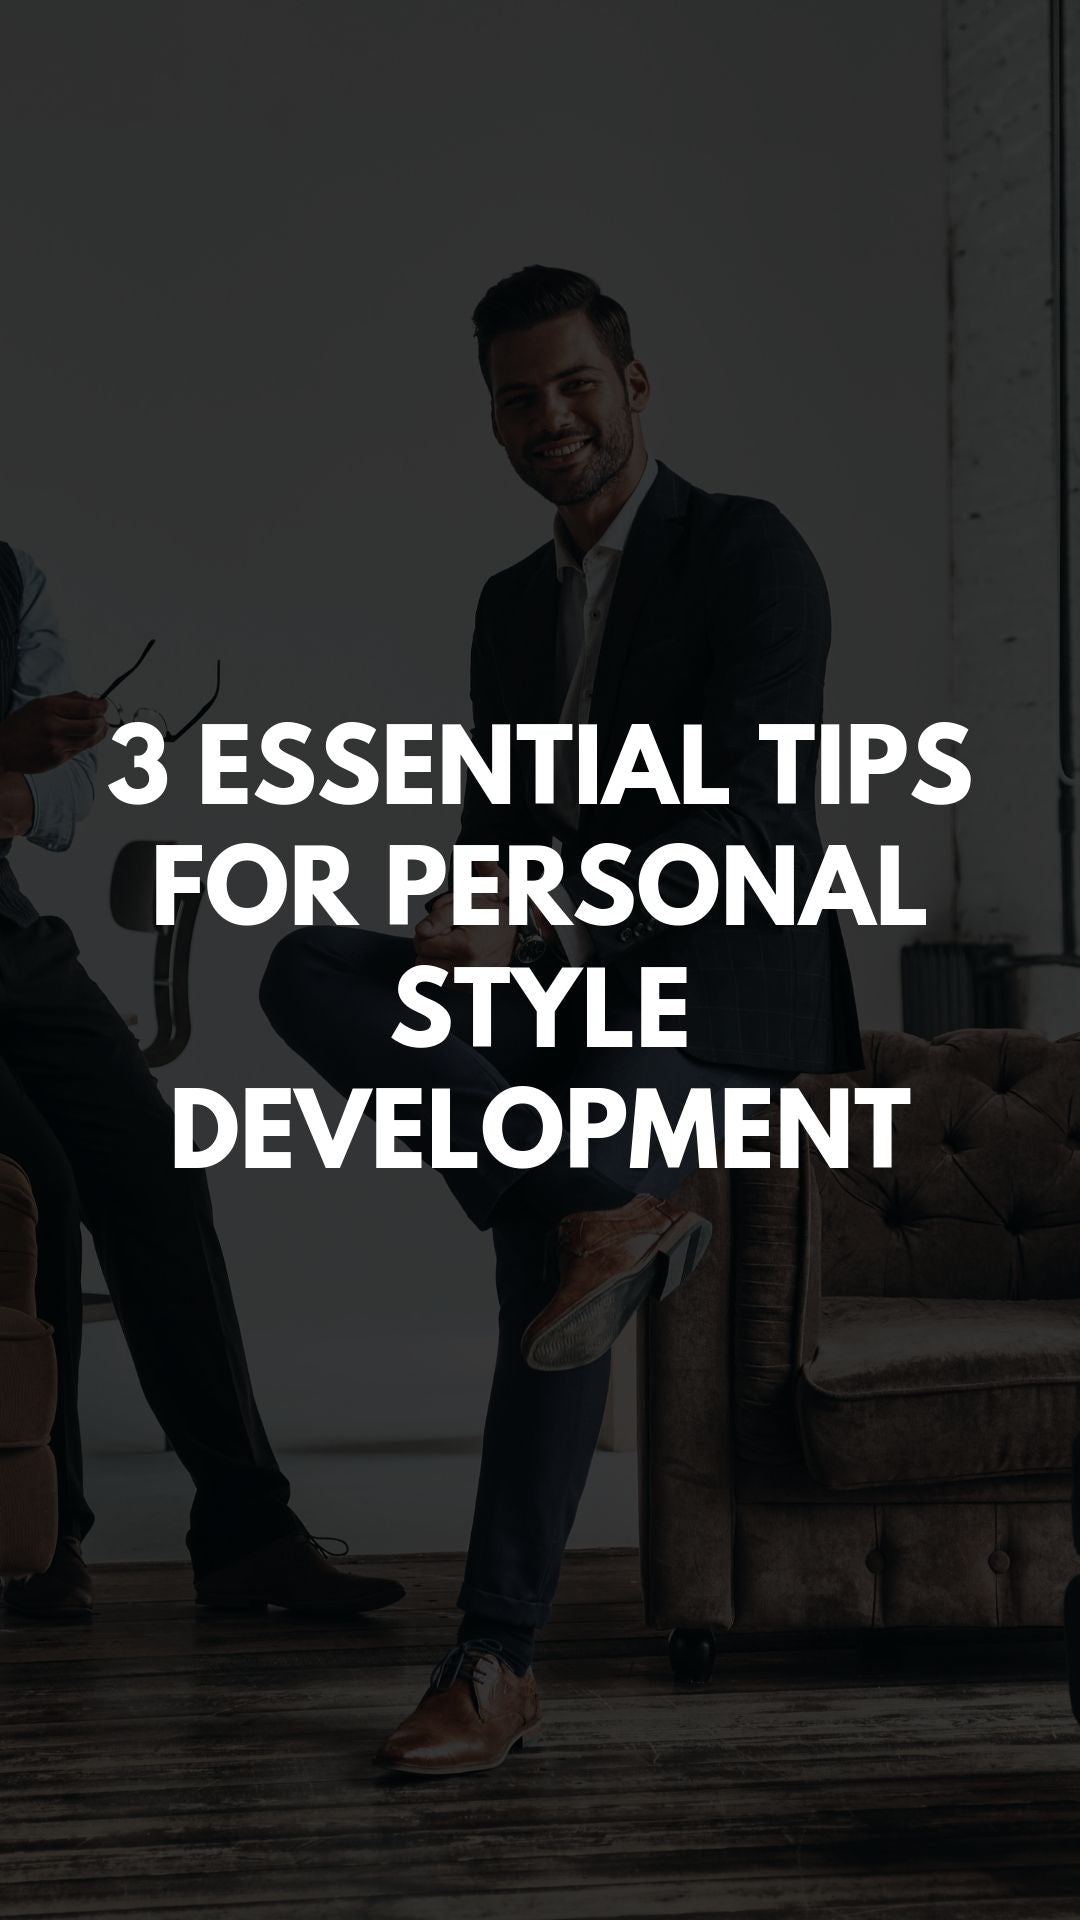 3 Essential Tips for Personal Style Development